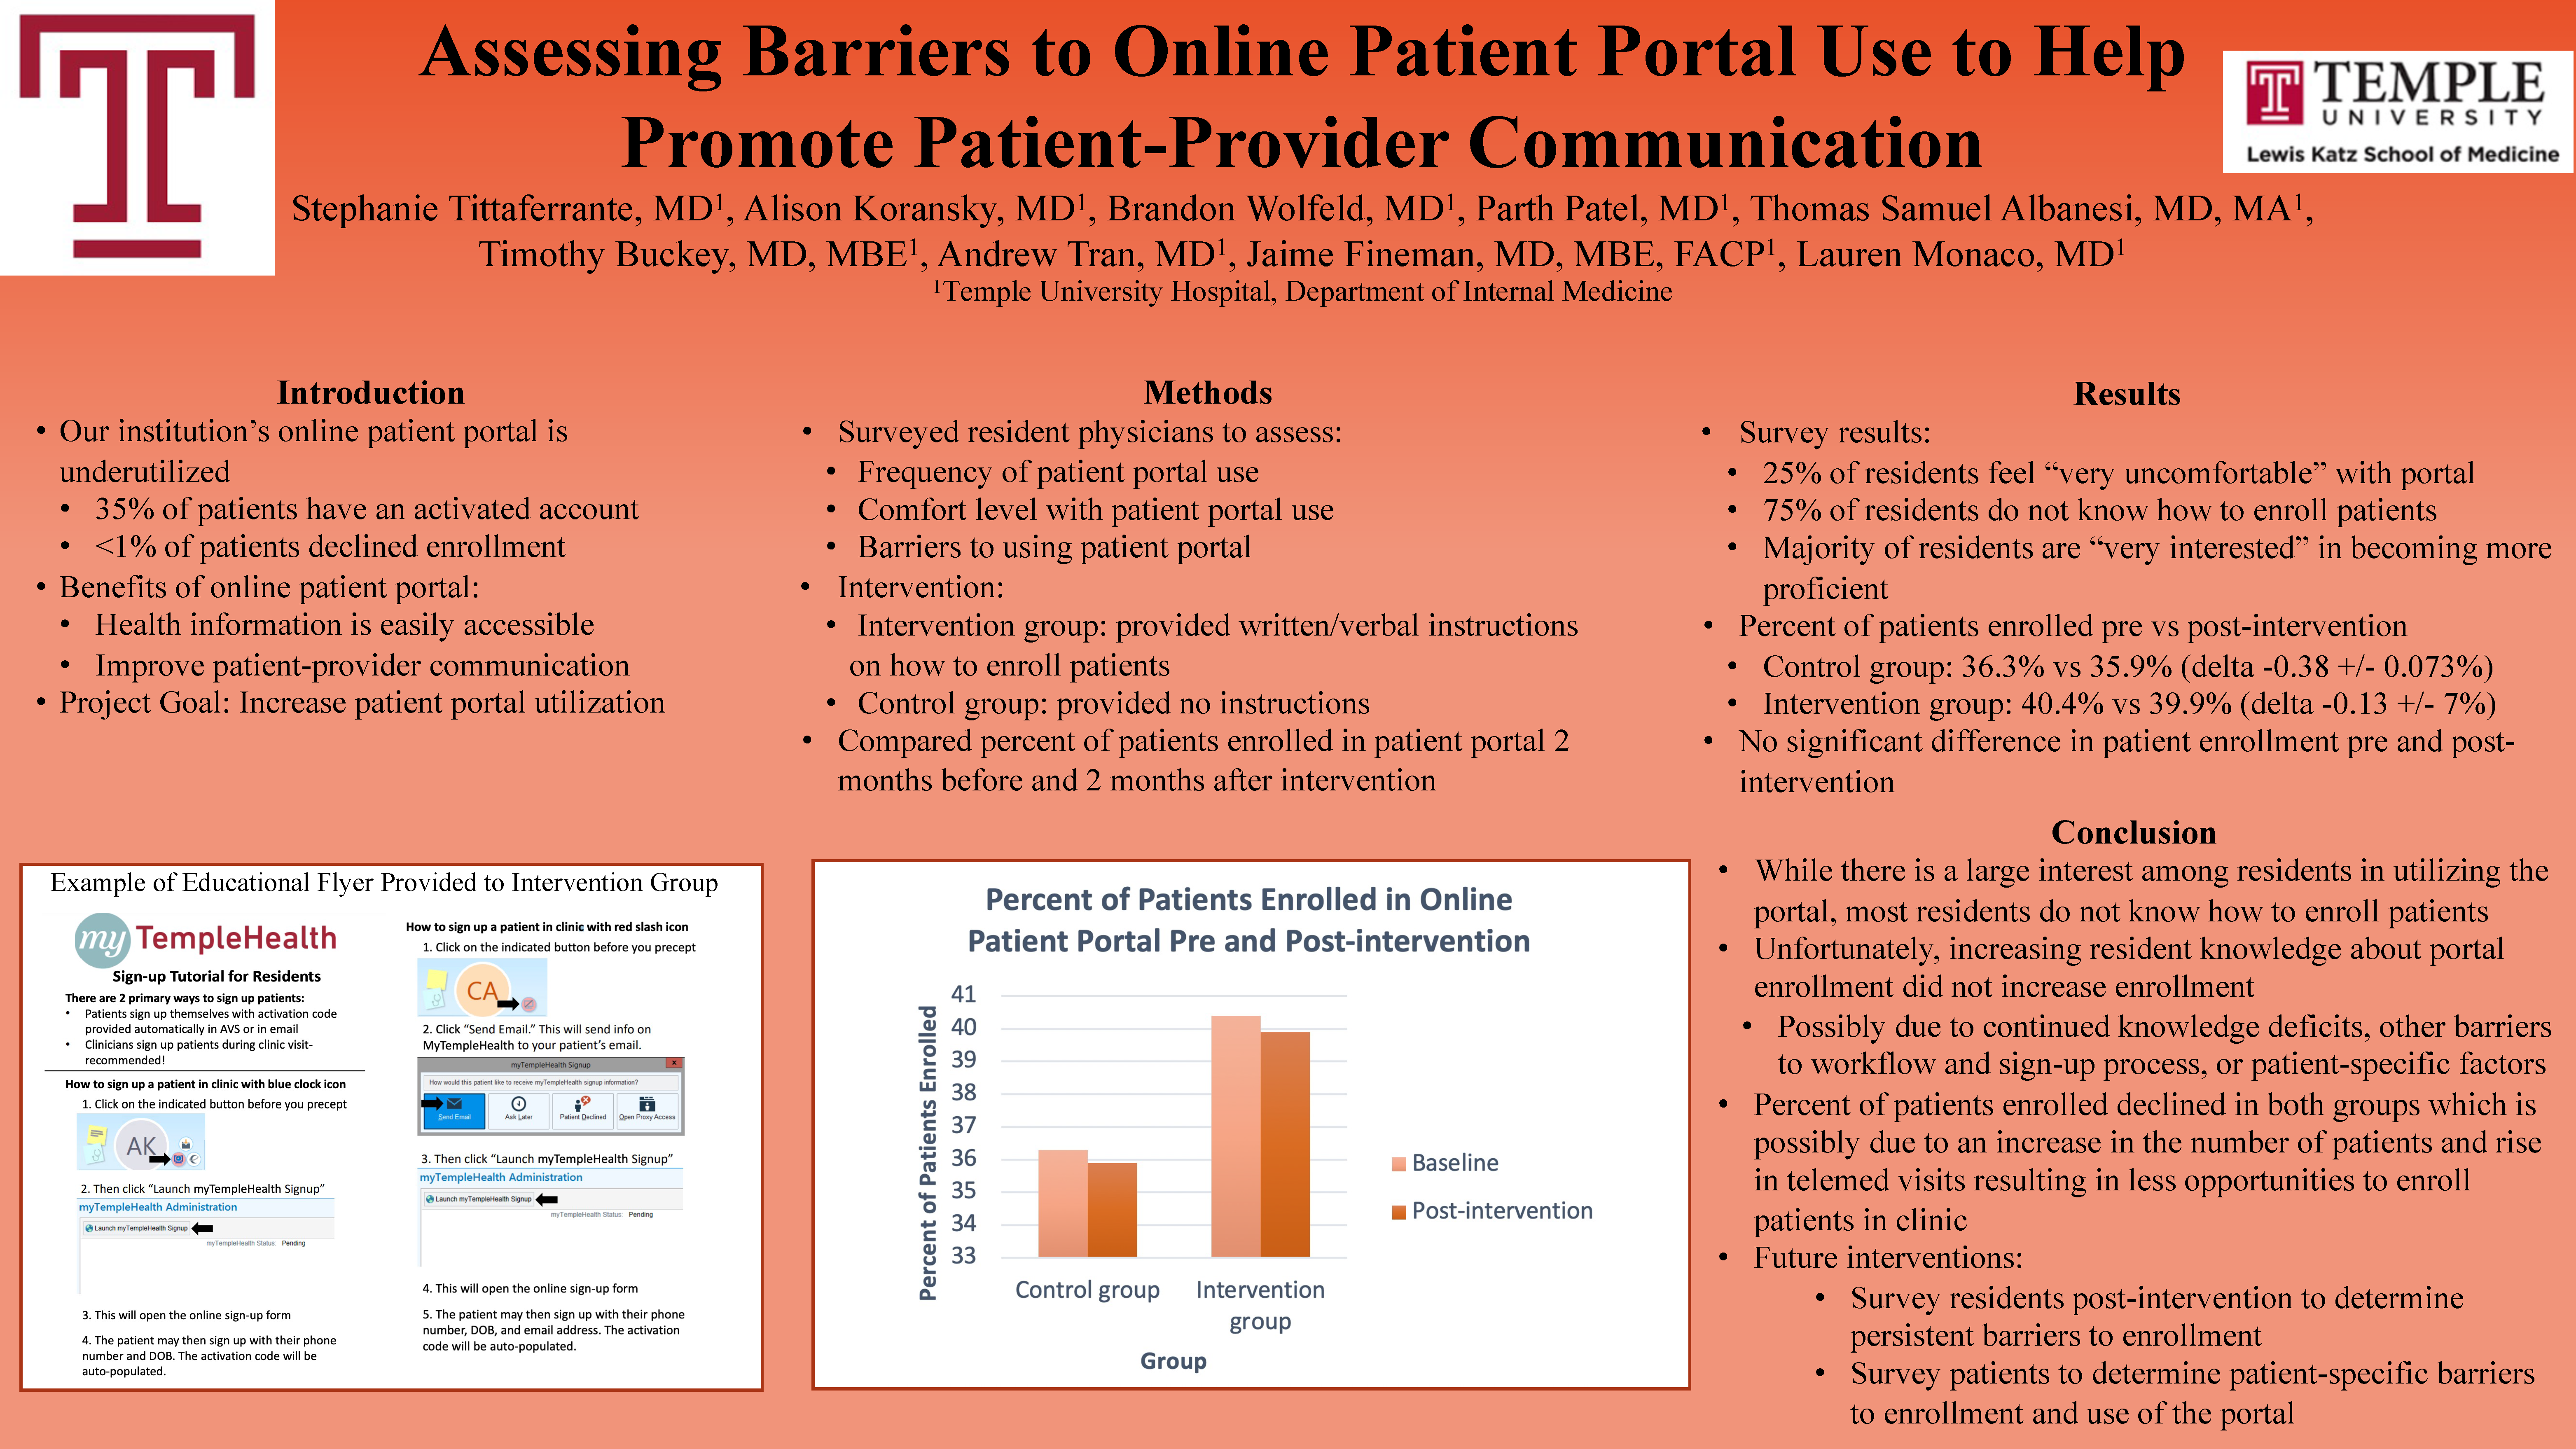 Stephanie Tittaferrante - PAS-20-Assessing-Barriers-to-Online-Patient-Portal-Use-to-Help-Promote-Patient-Provider-Communication